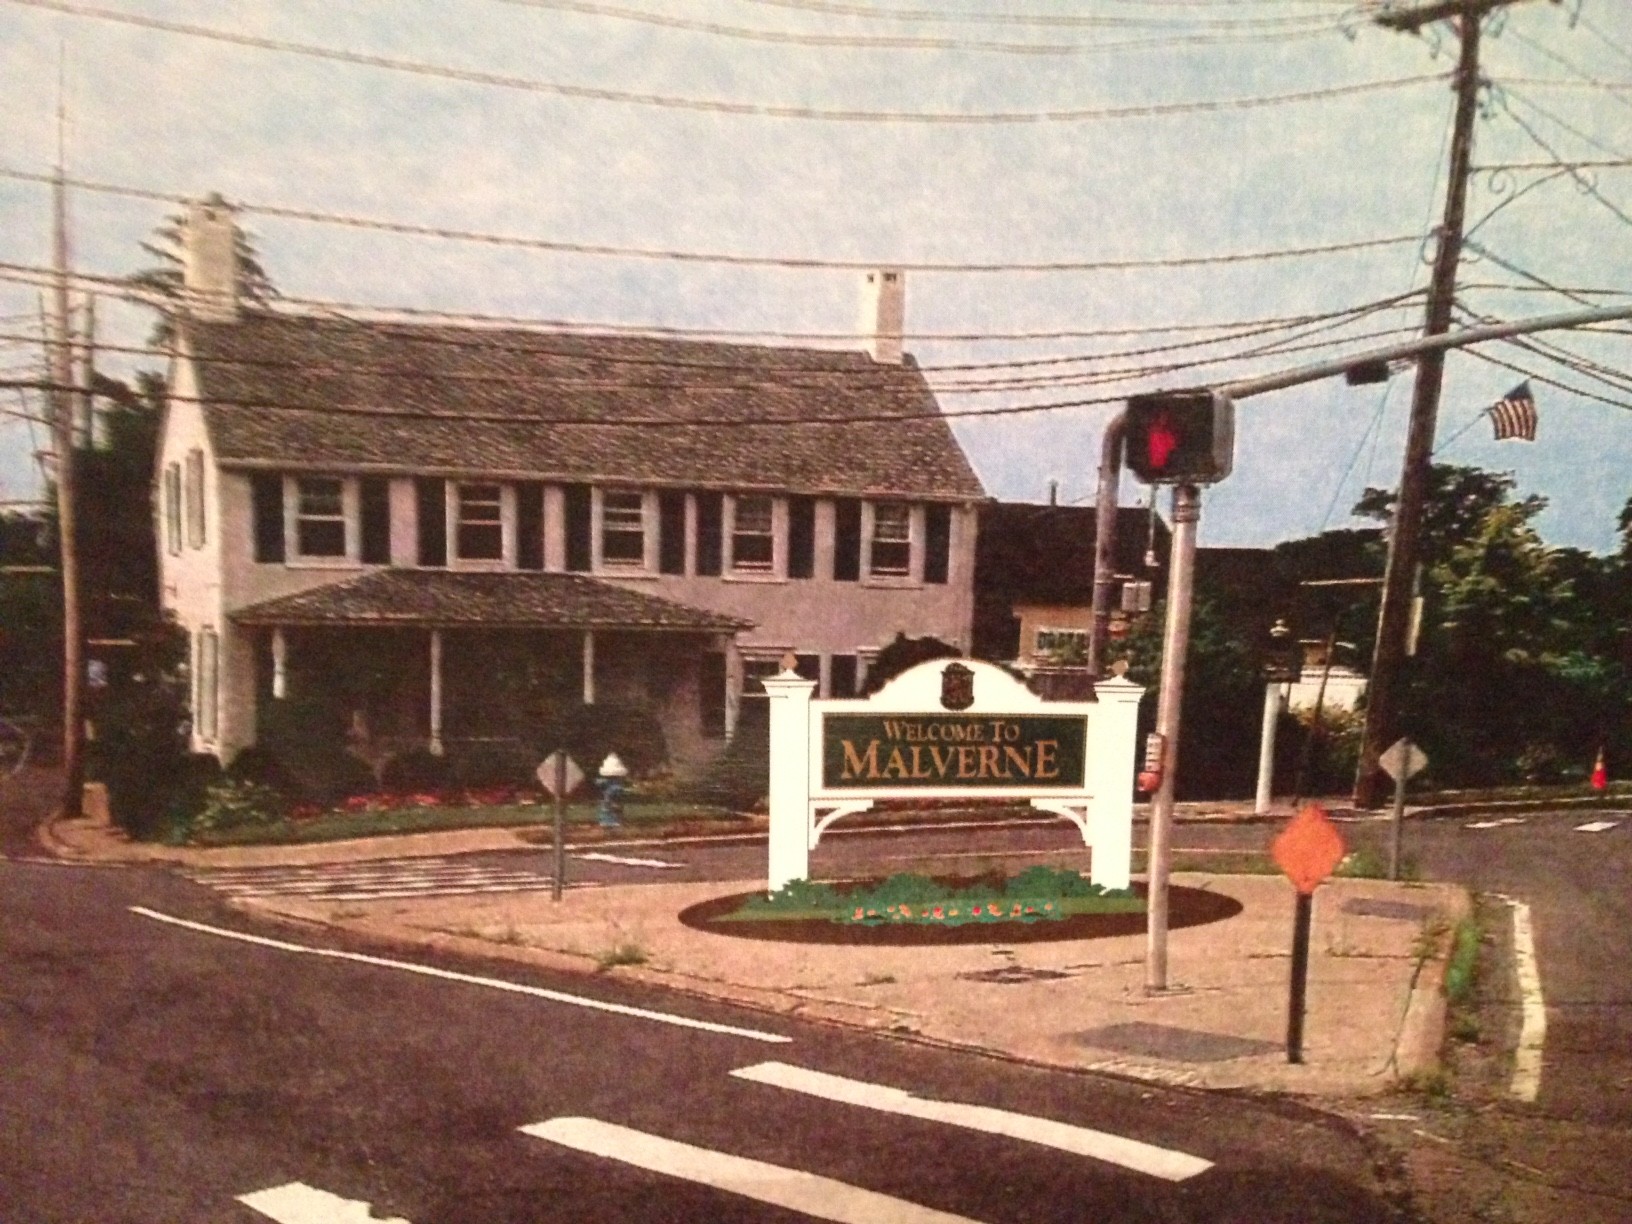 An artist’s rendering of a “Welcome to Malverne” sign that will be built and placed at intersection of Hempstead and Ocean avenues.